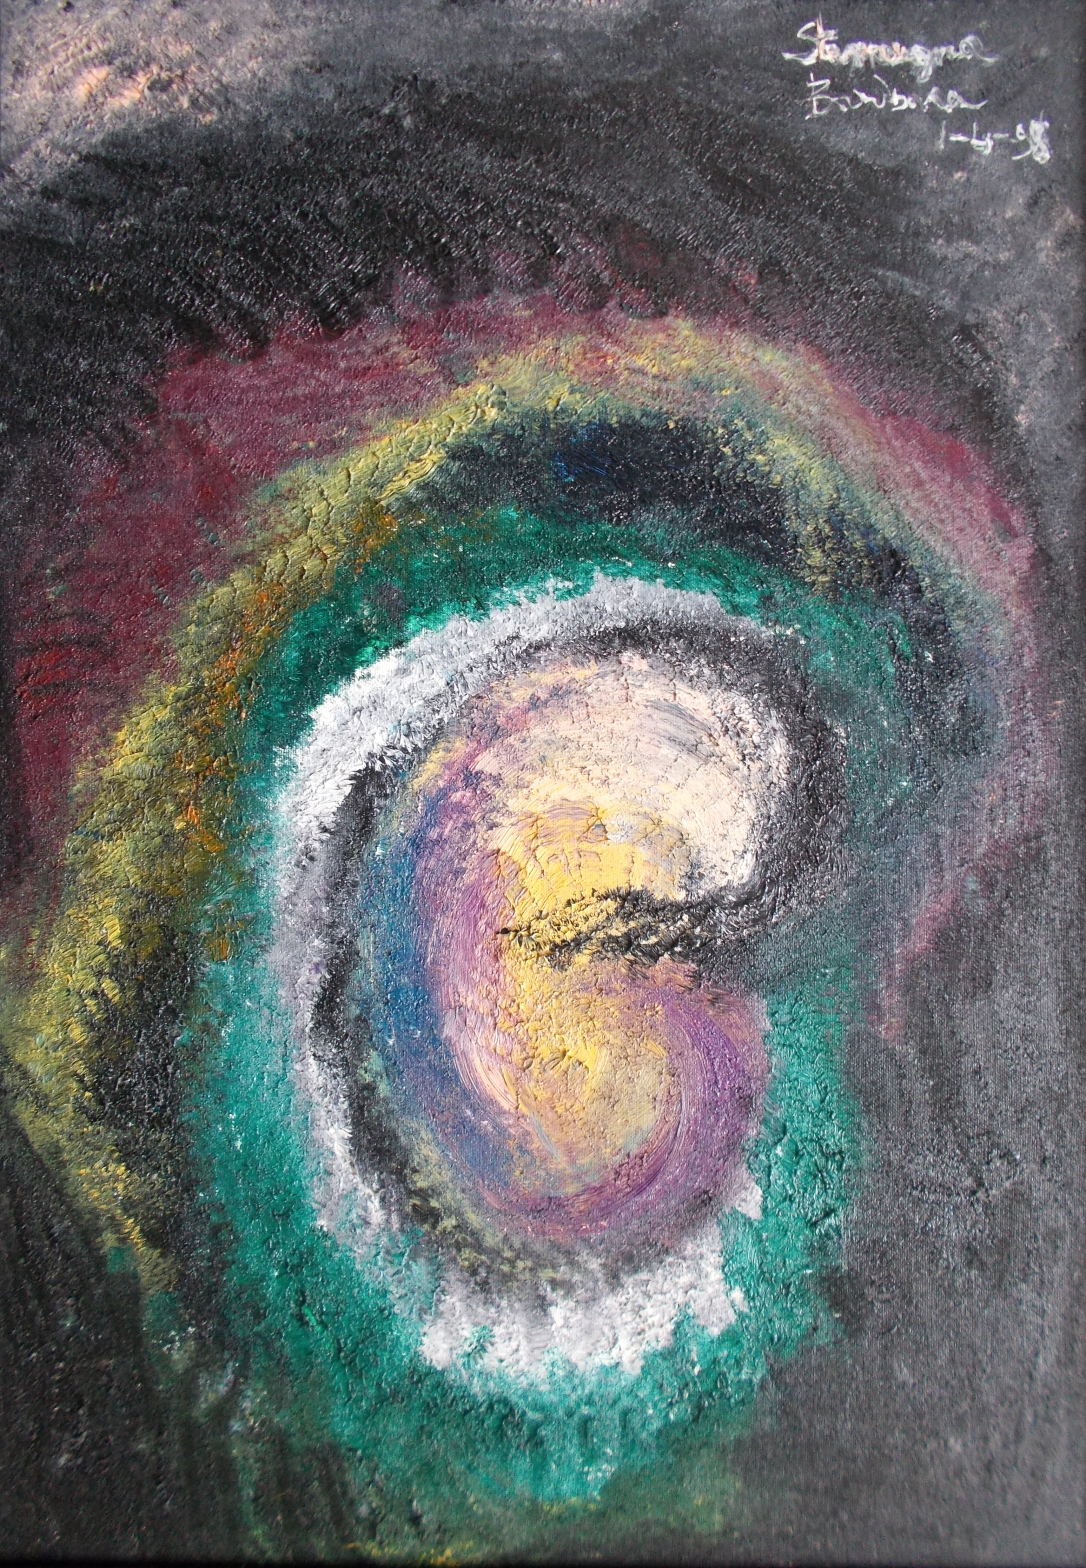 abstract outset of life like symbolic image with rounded concentric shapes and nuances.